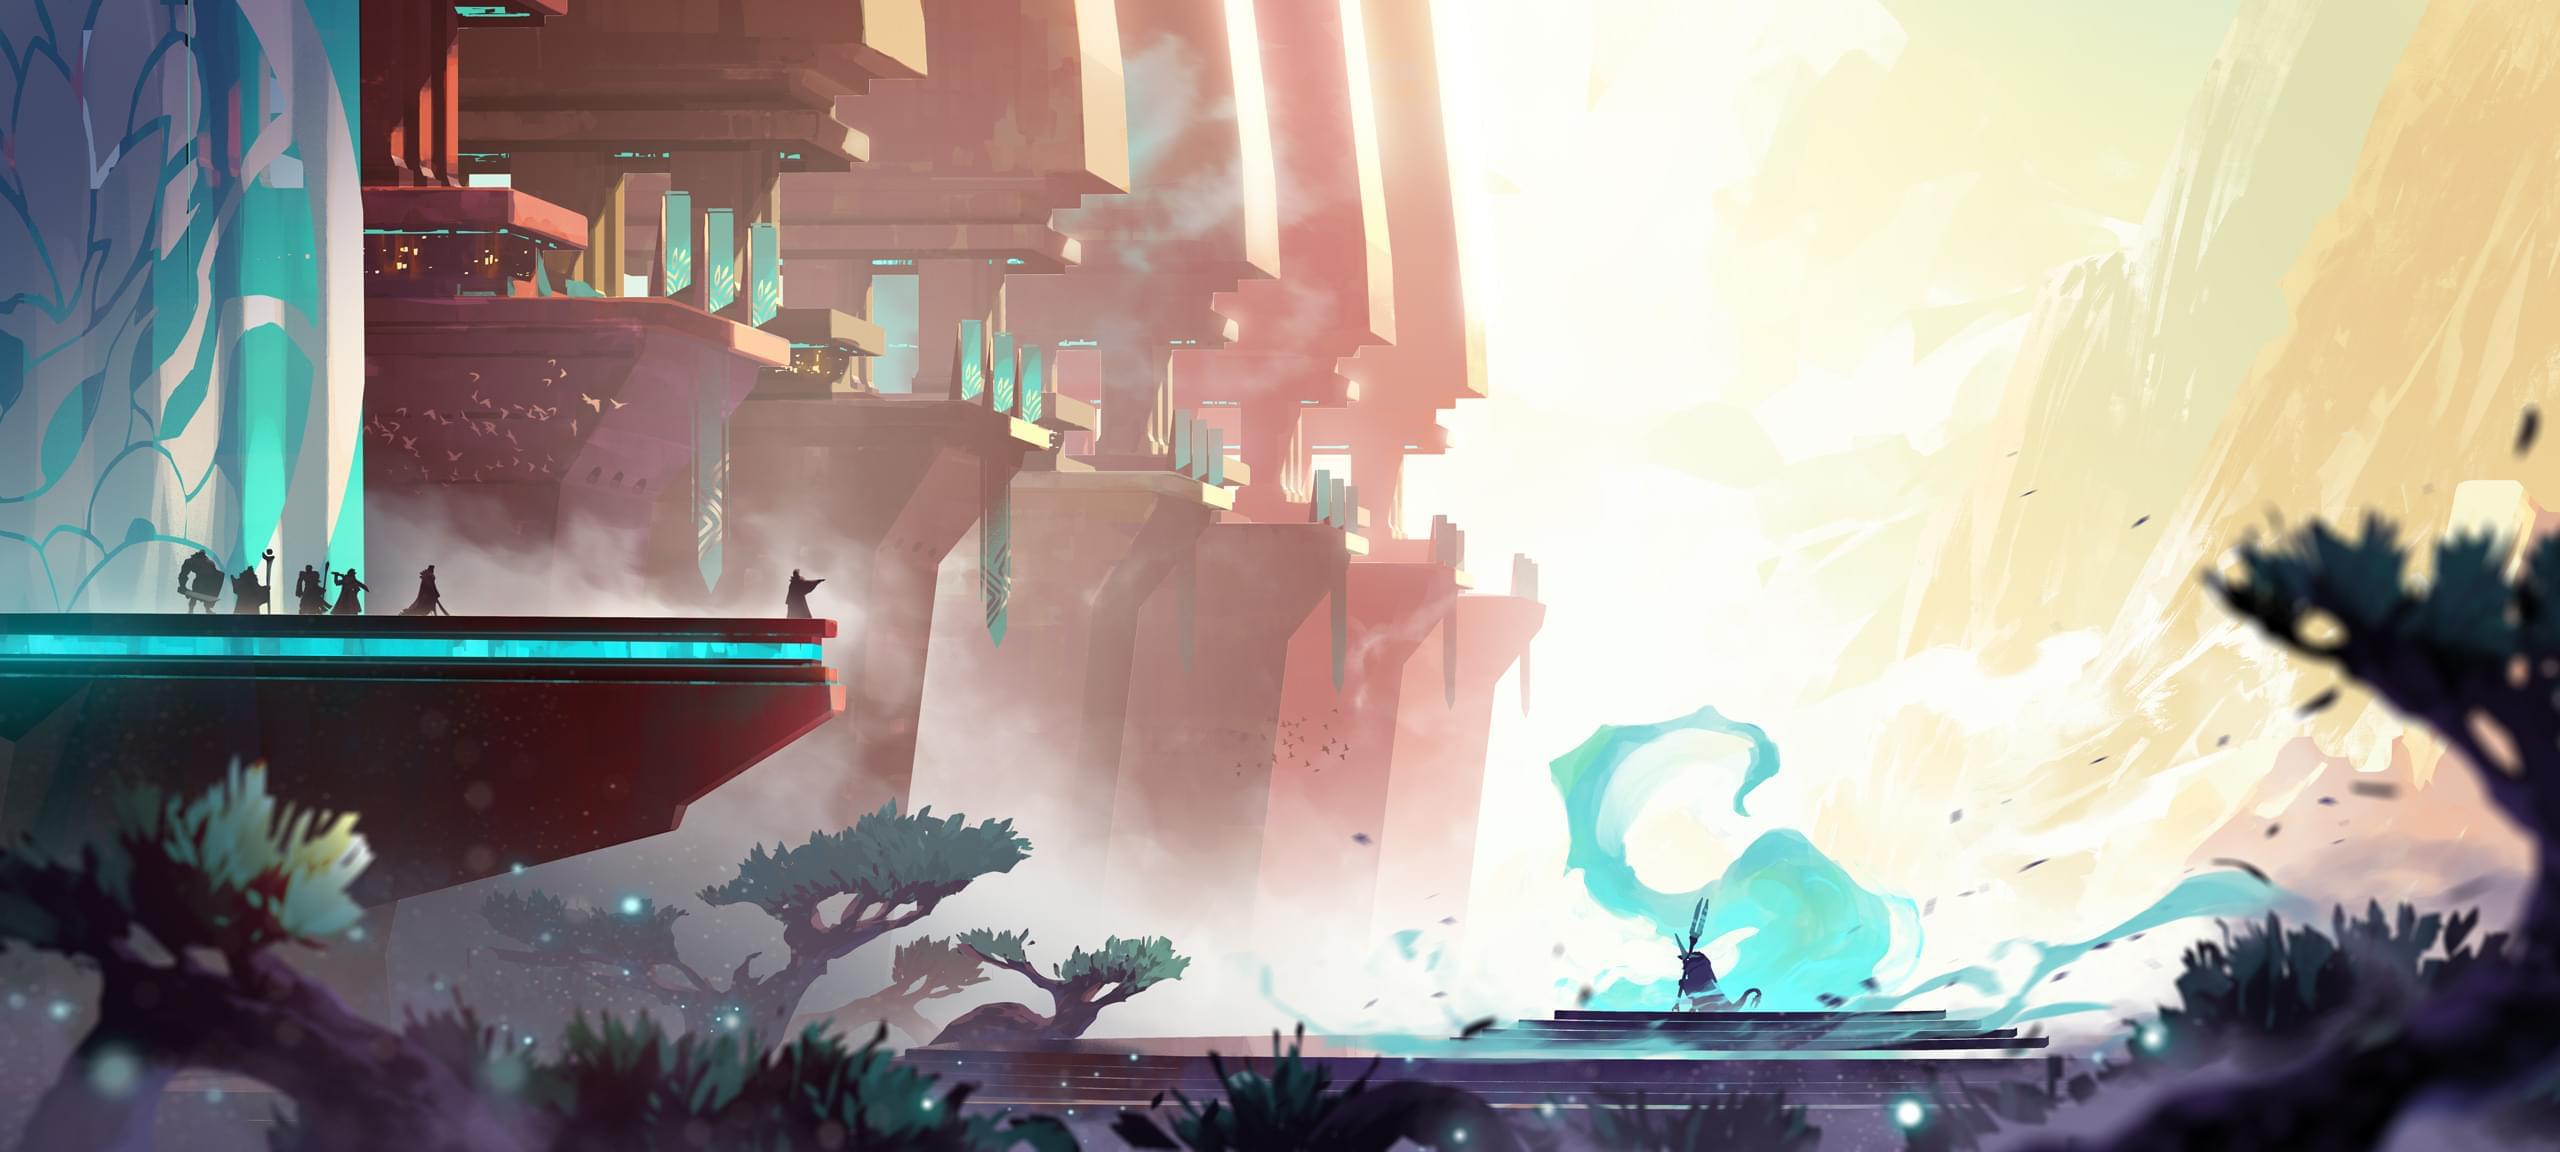 Video Game Duelyst 2560x1152